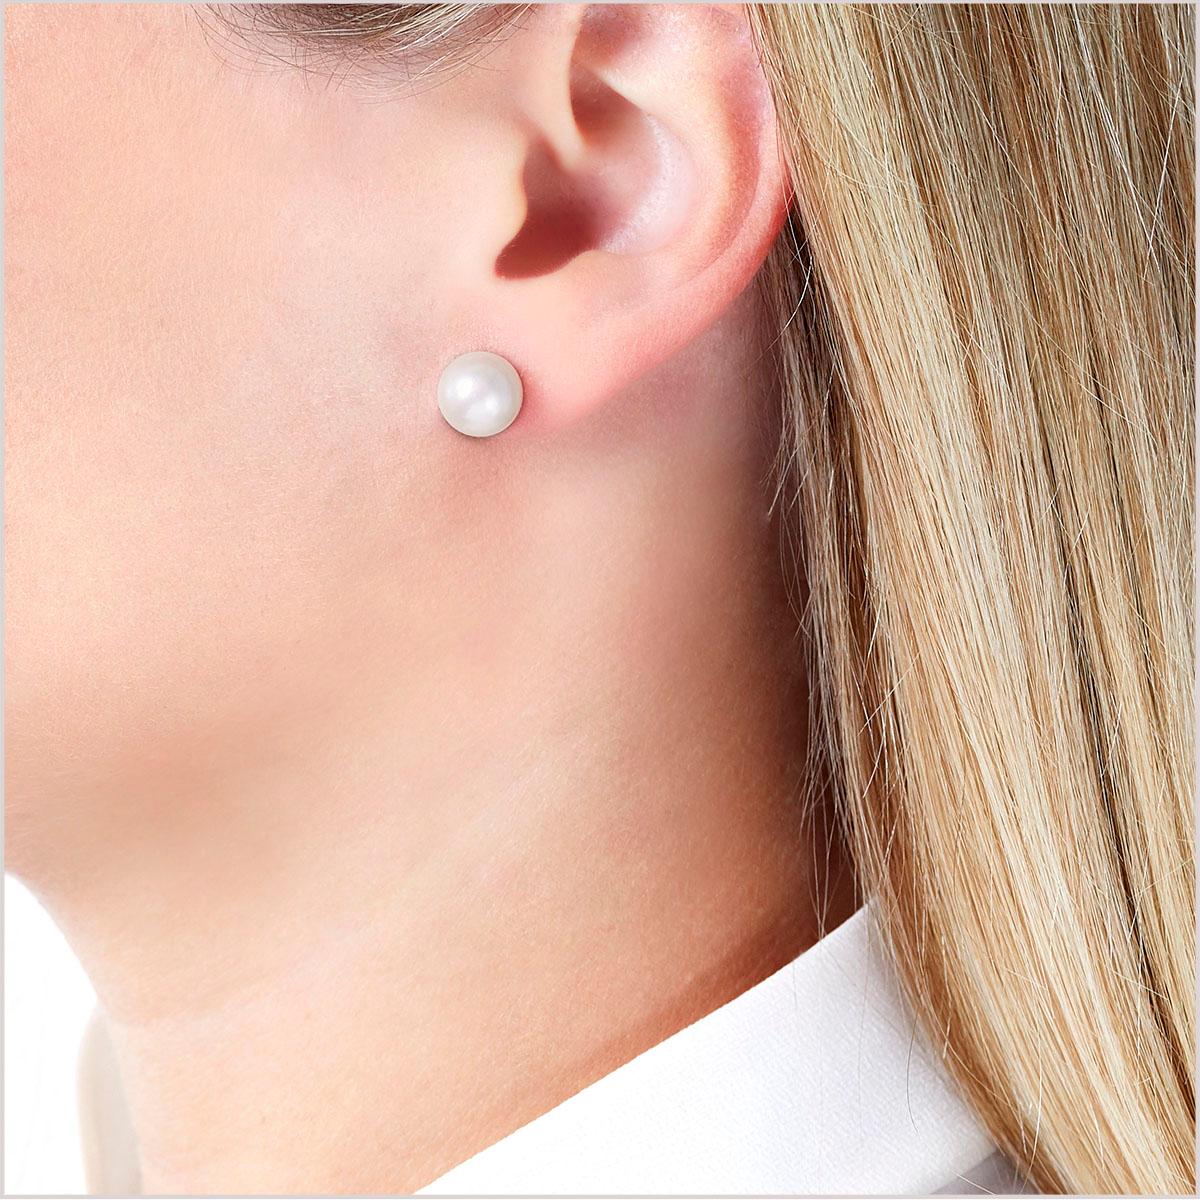 These timeless studs from Yoko London feature high-quality 9mm Japanese Akoya pearls, set in 18 Karat yellow gold. Classically elegant, a pair of timeless pearl studs are a must have for every jewellery box and will add a touch of glamour to any